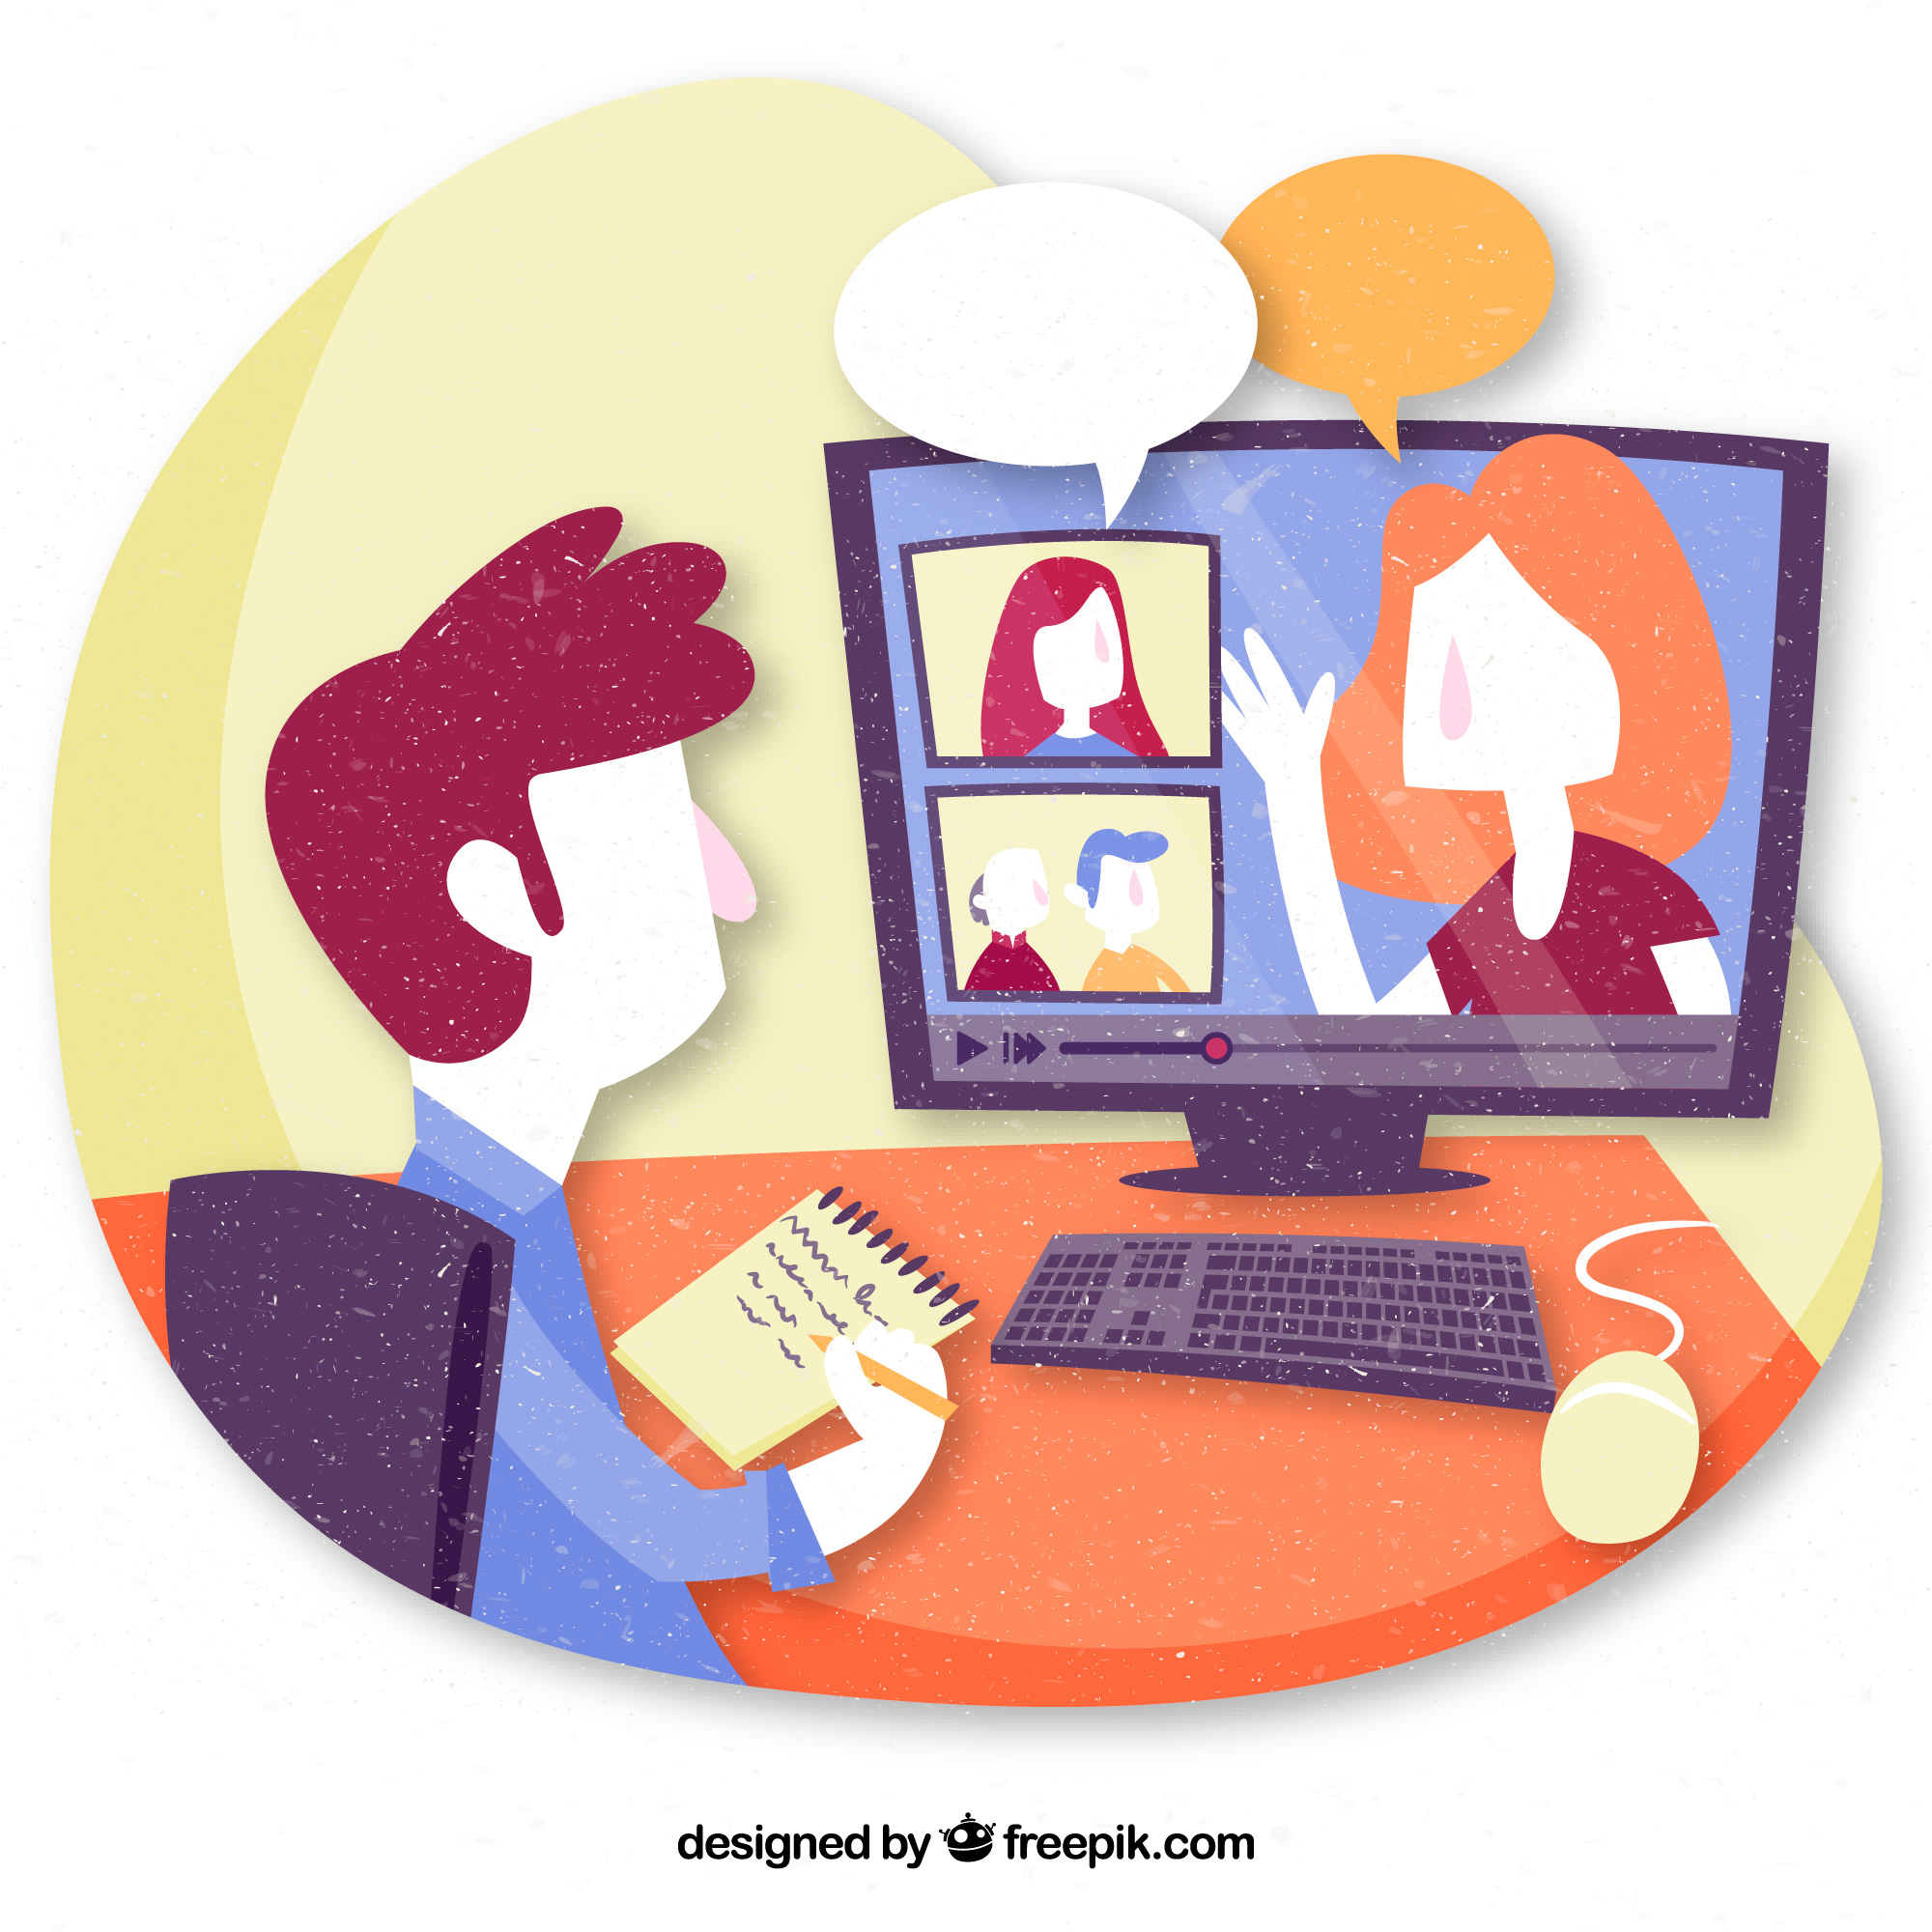 Person participating in a virtual meeting for eLearning using storytelling